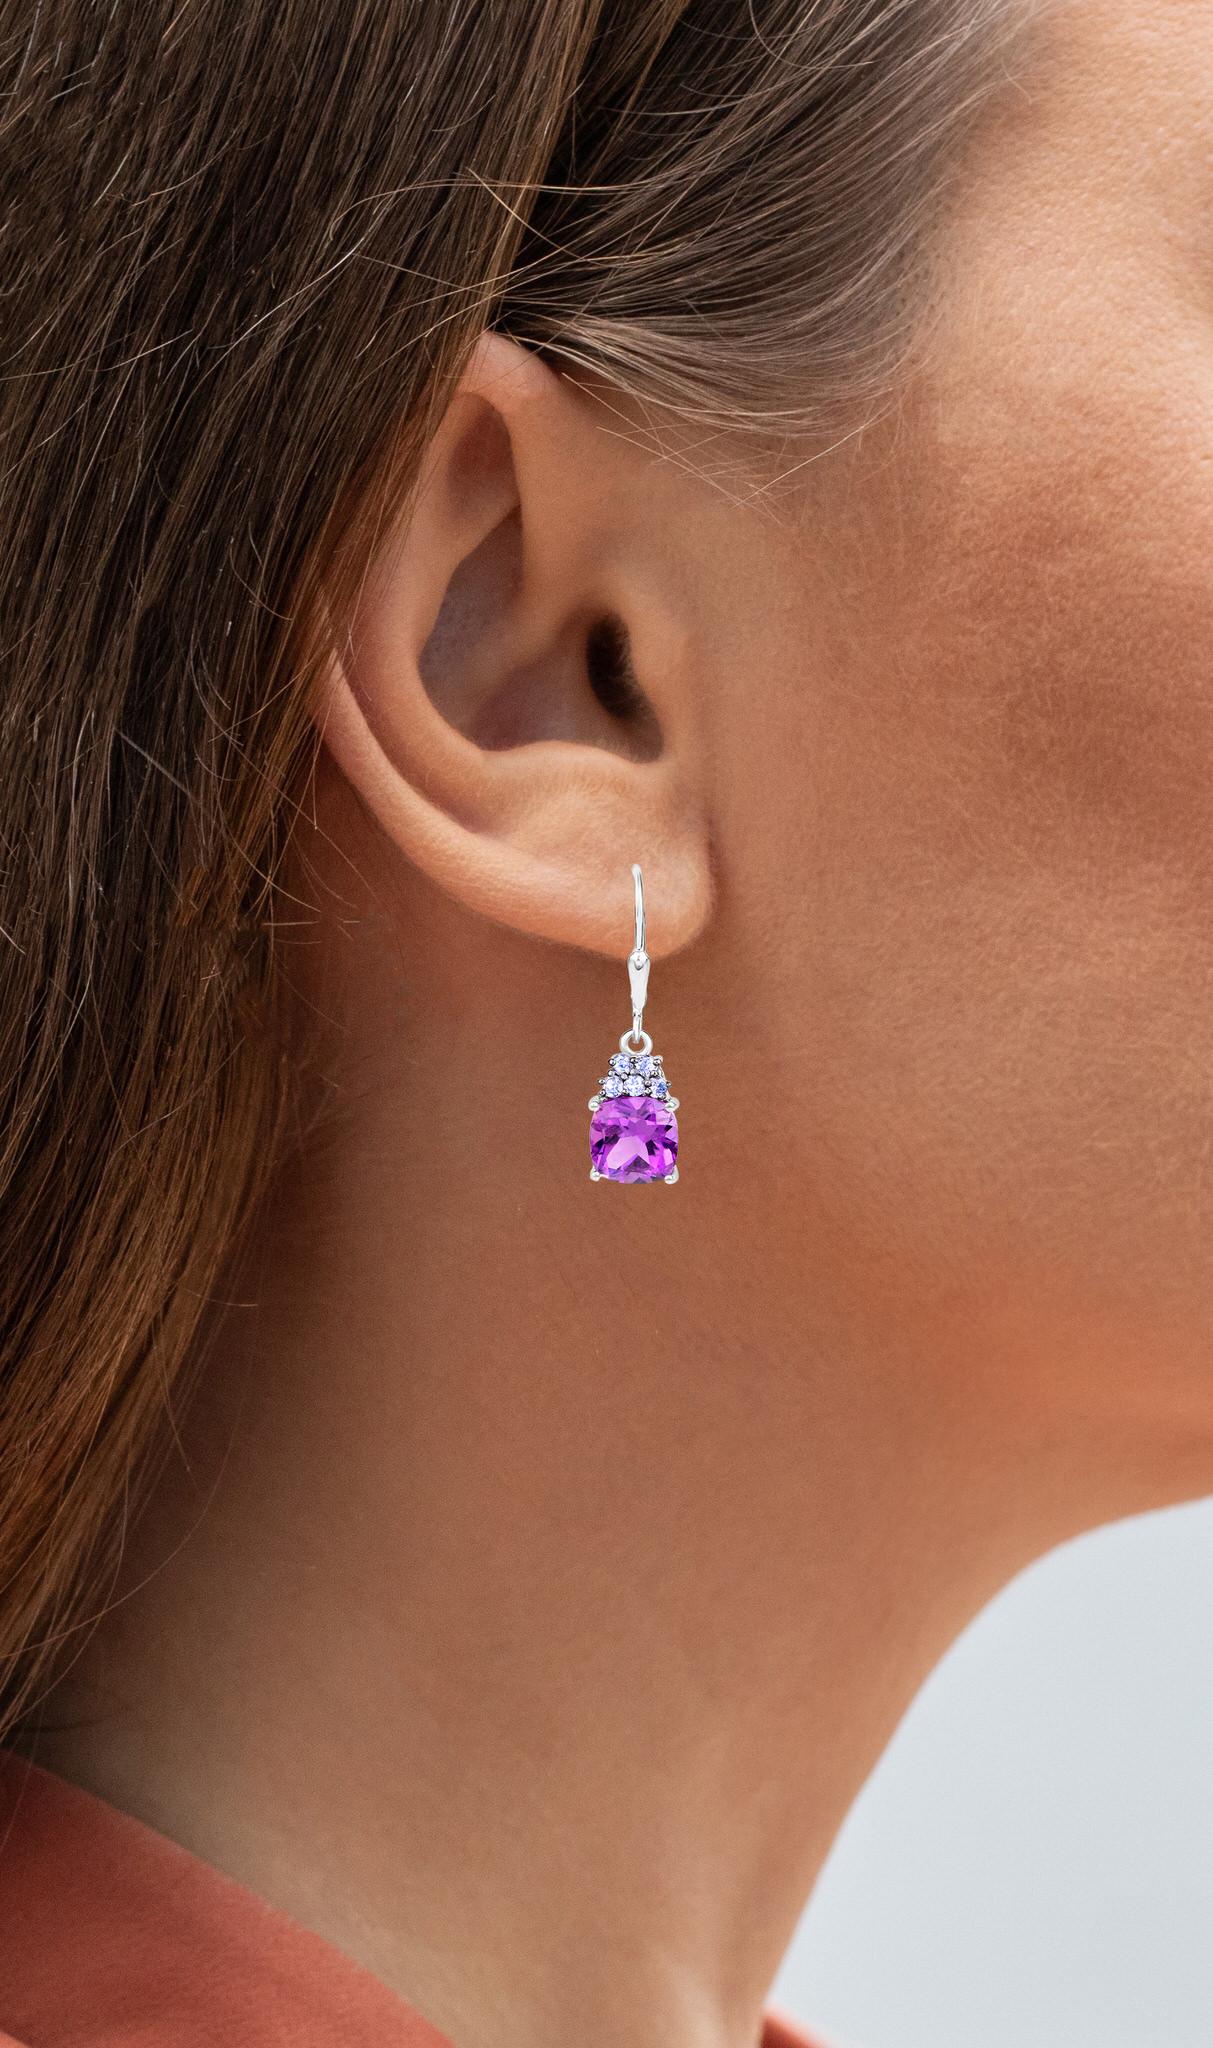 It comes with the Gemological Appraisal by GIA GG/AJP
All Gemstones are Natural
2 Cushion Amethysts = 3.60 Carats
10 Round Tanzanites = 0.40 Carats
Metal: Rhodium Plated Sterling Silver
Dimensions: 29 x 8 mm
